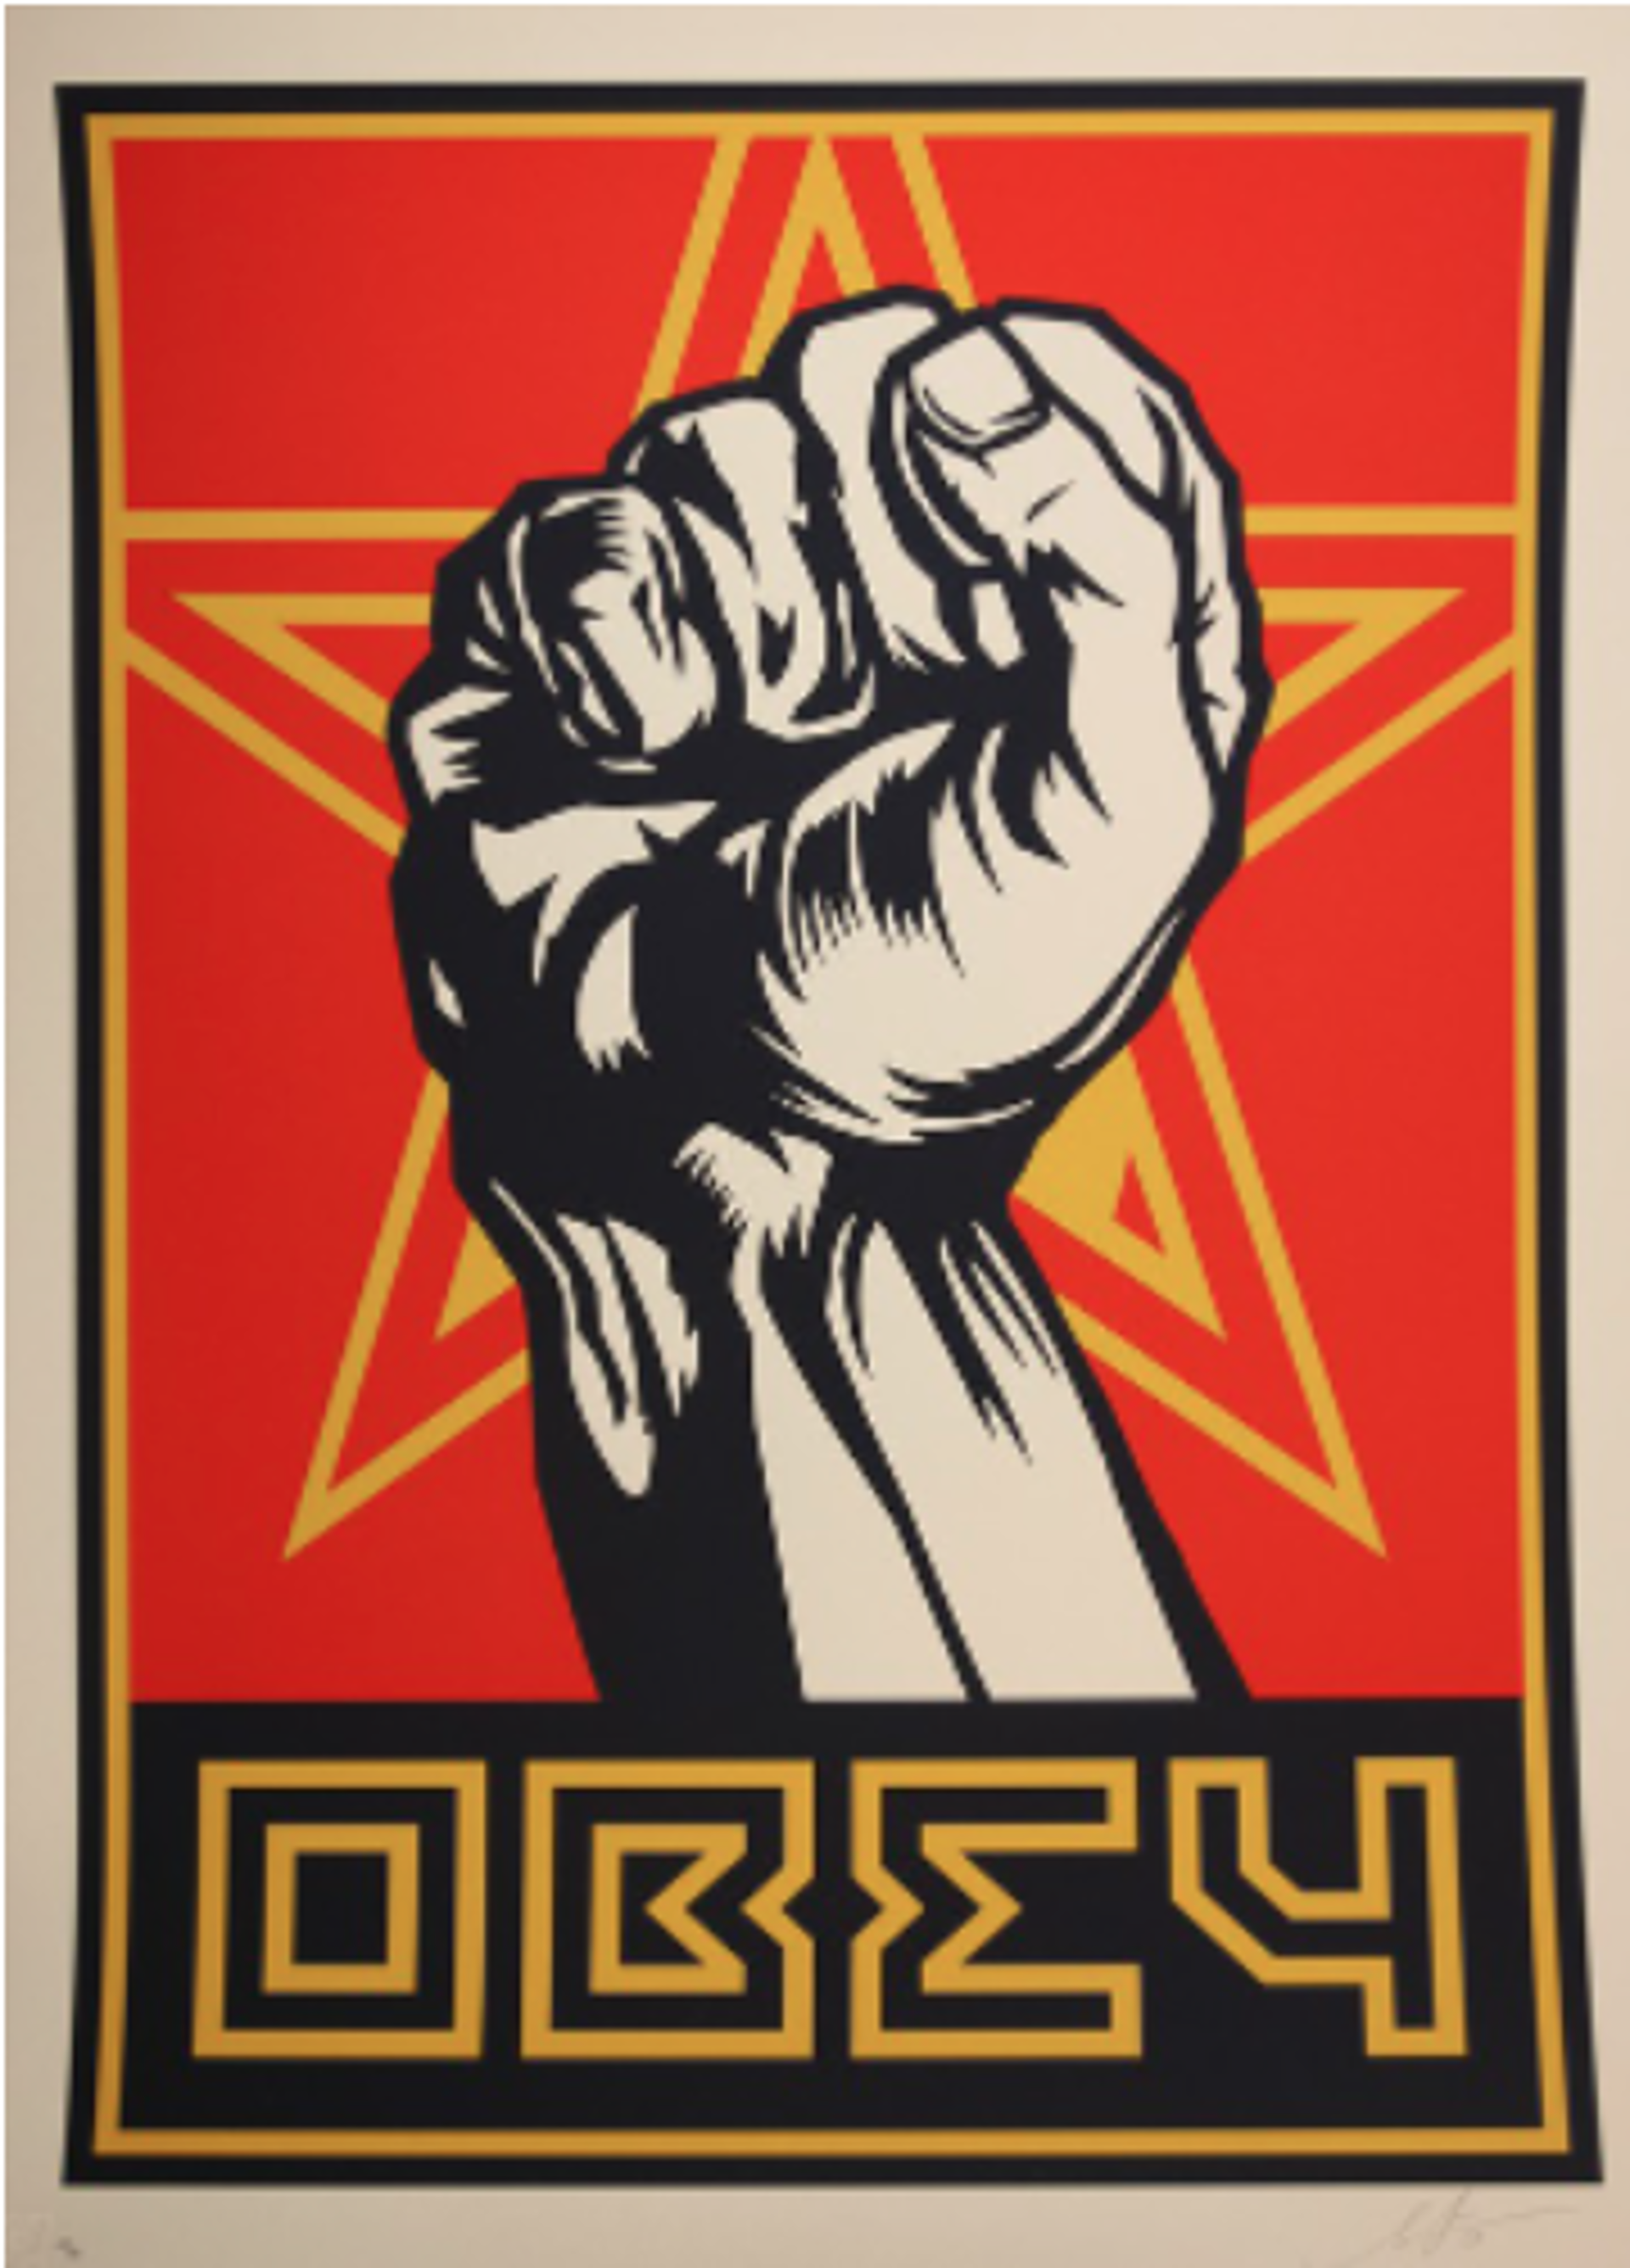 Fist by Shepard Fairey / Limited editions